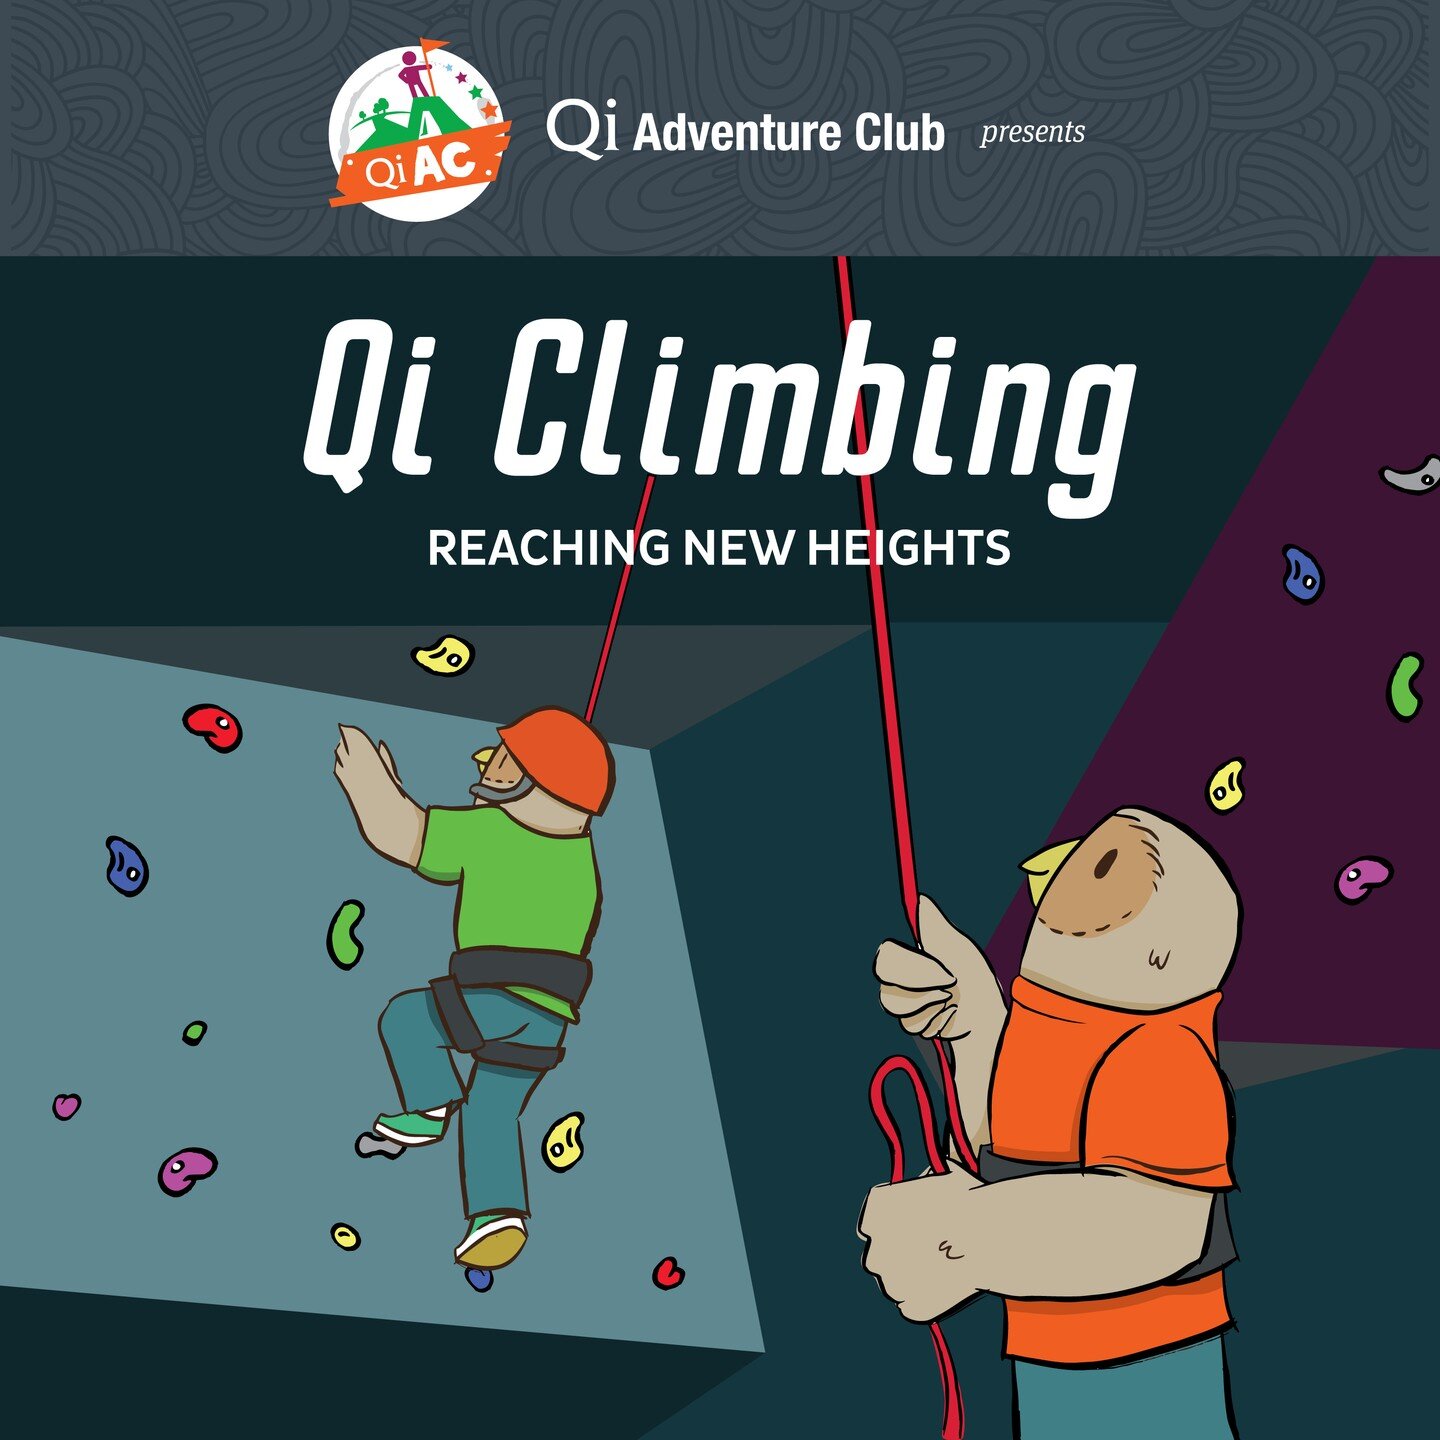 Qi Climbing is BACK for Fall 2022! 🧗

Enjoy one-on-one coaching support as children of all ages and abilities learn to rock climb.

Visit qiadventureclub.com for dates, costs, and registration.